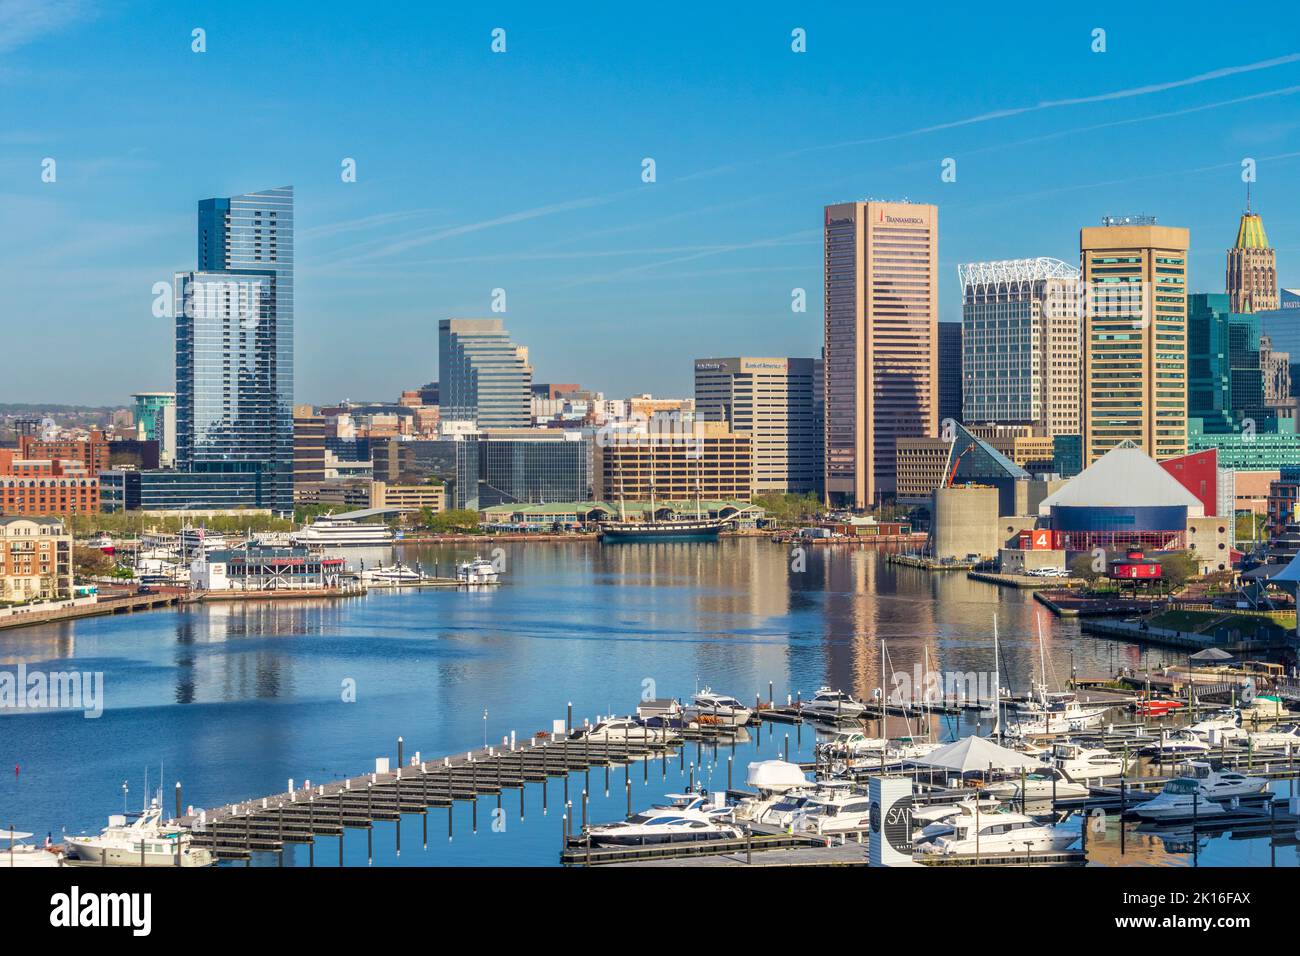 Baltimore Inner Harbor, mixture of historic and modern skyscrapers and museums, Baltimore, Maryland. Stock Photo